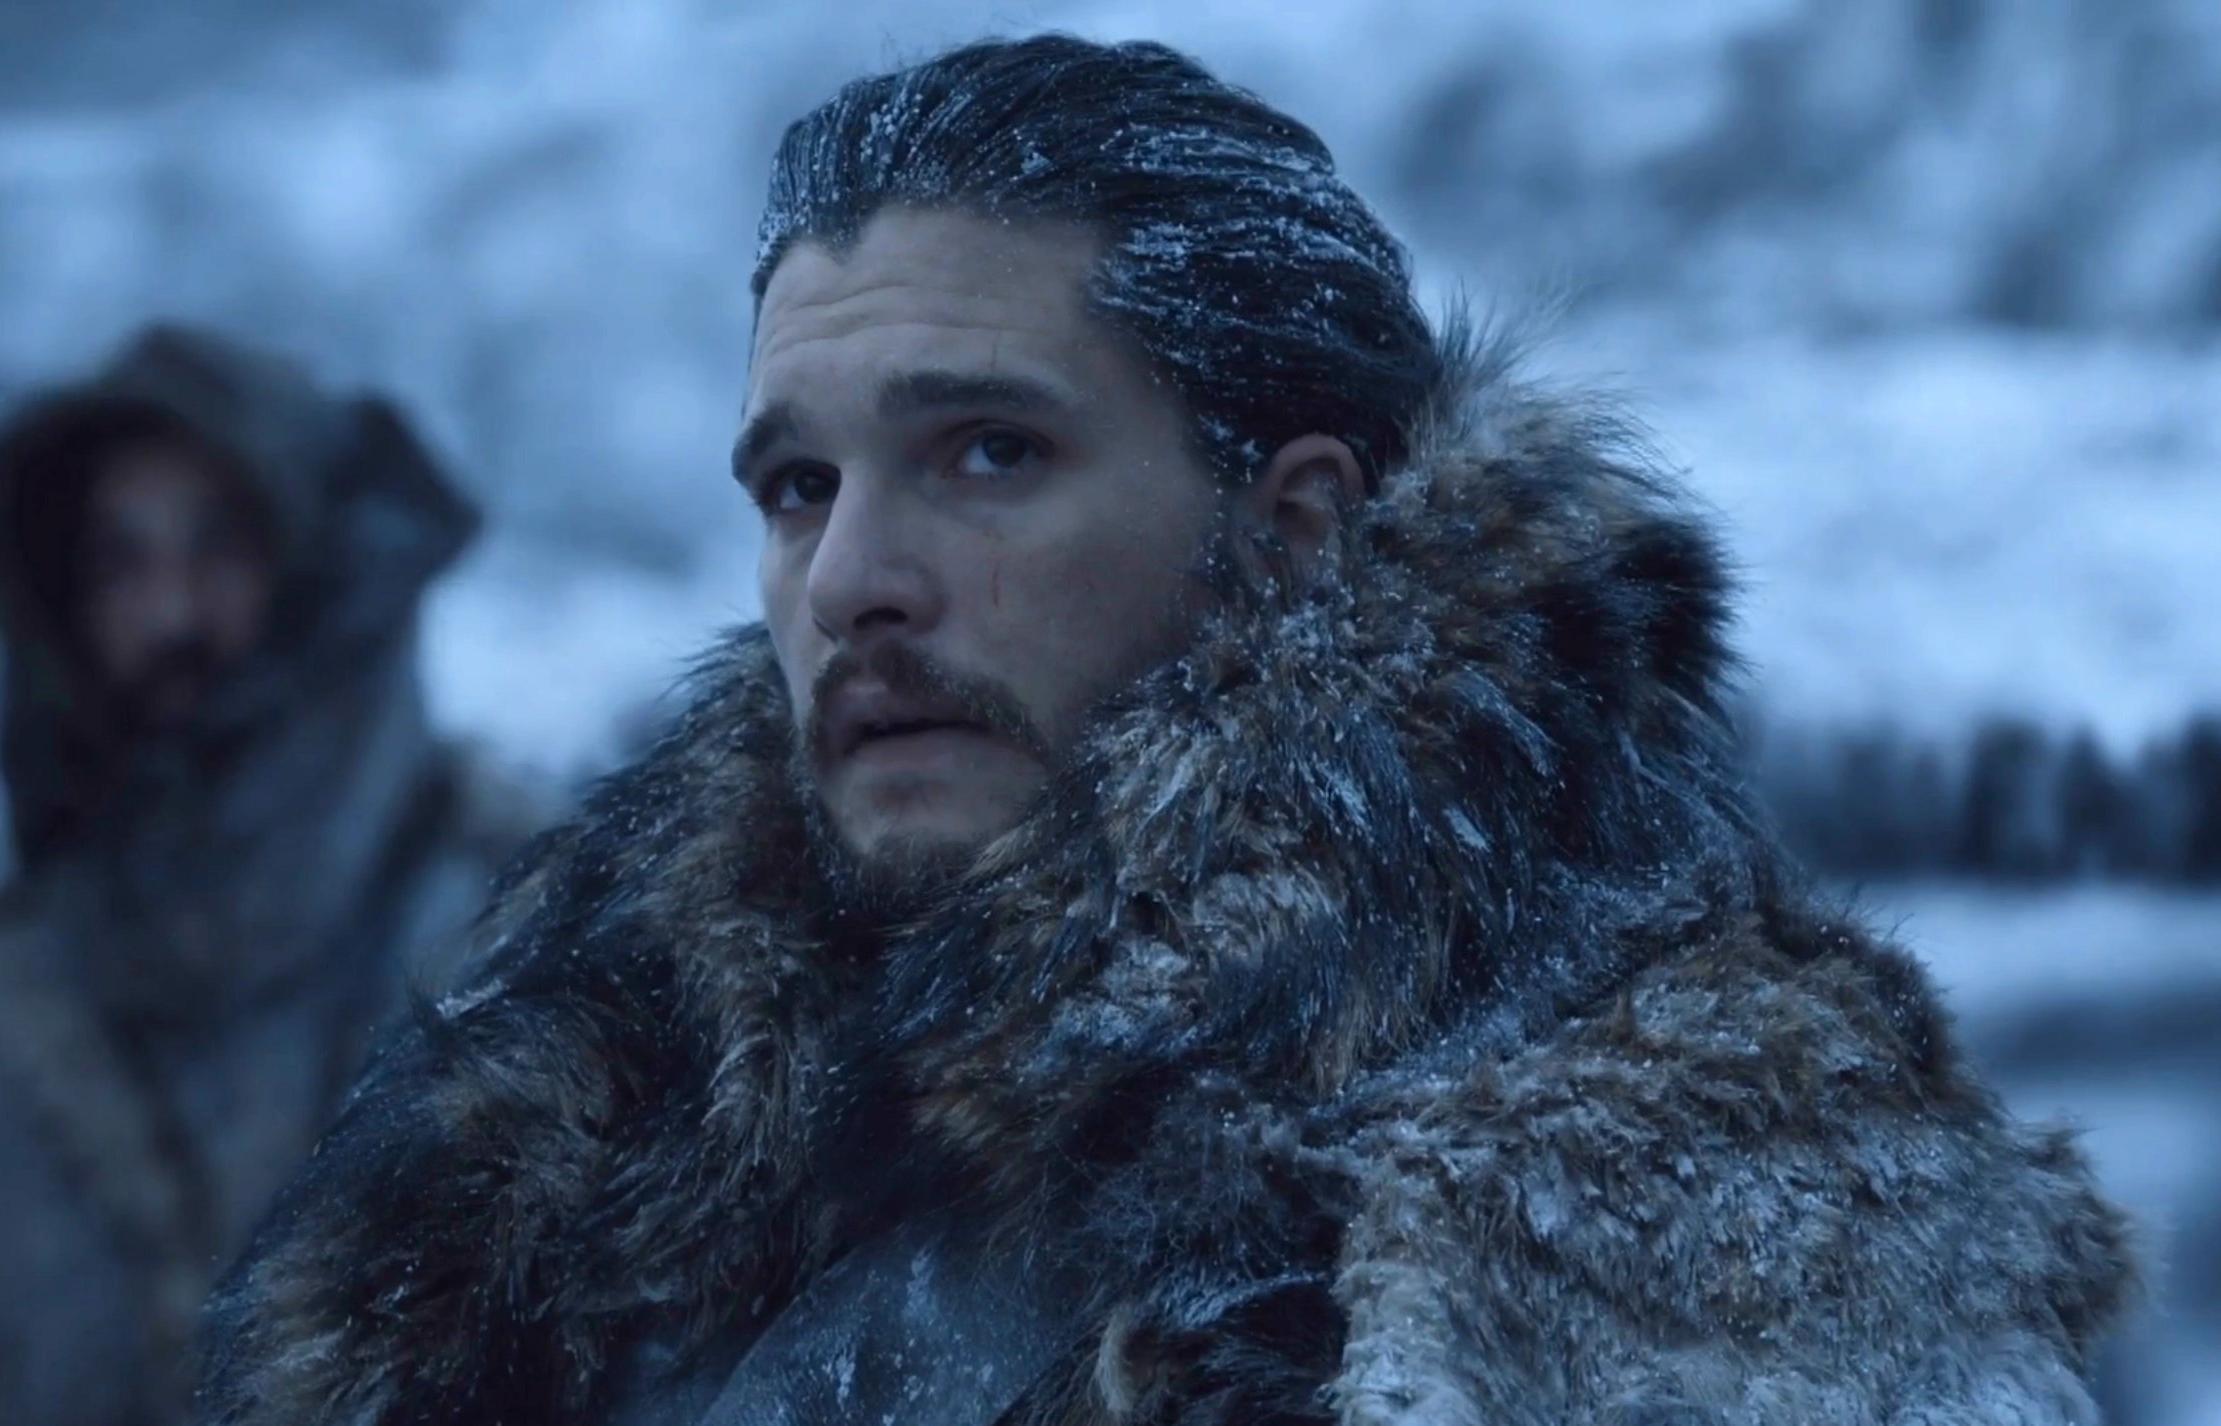 Aegon Targaryen: The significance of Jon Snow's real name, revealed in the Game of Thrones season 7 finale